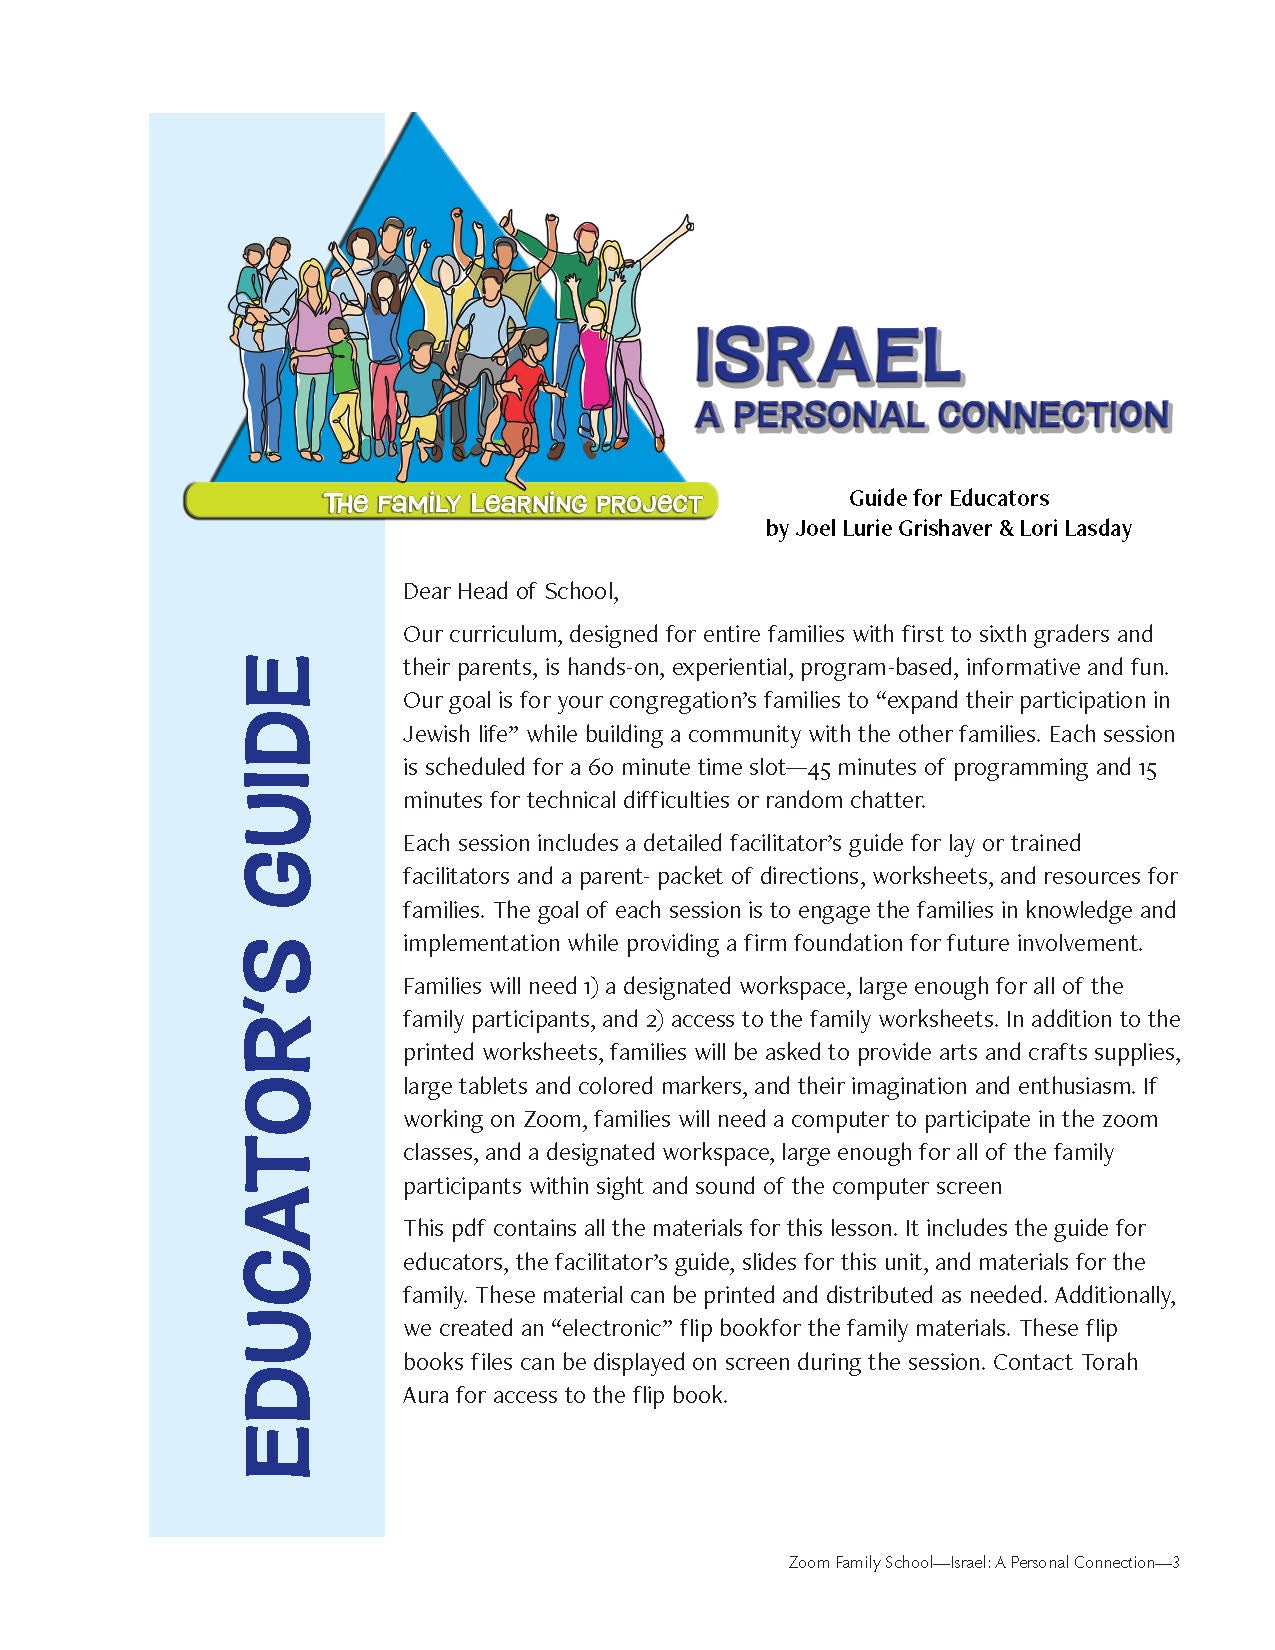 Family Learning Project: Israel—A Personal Connection